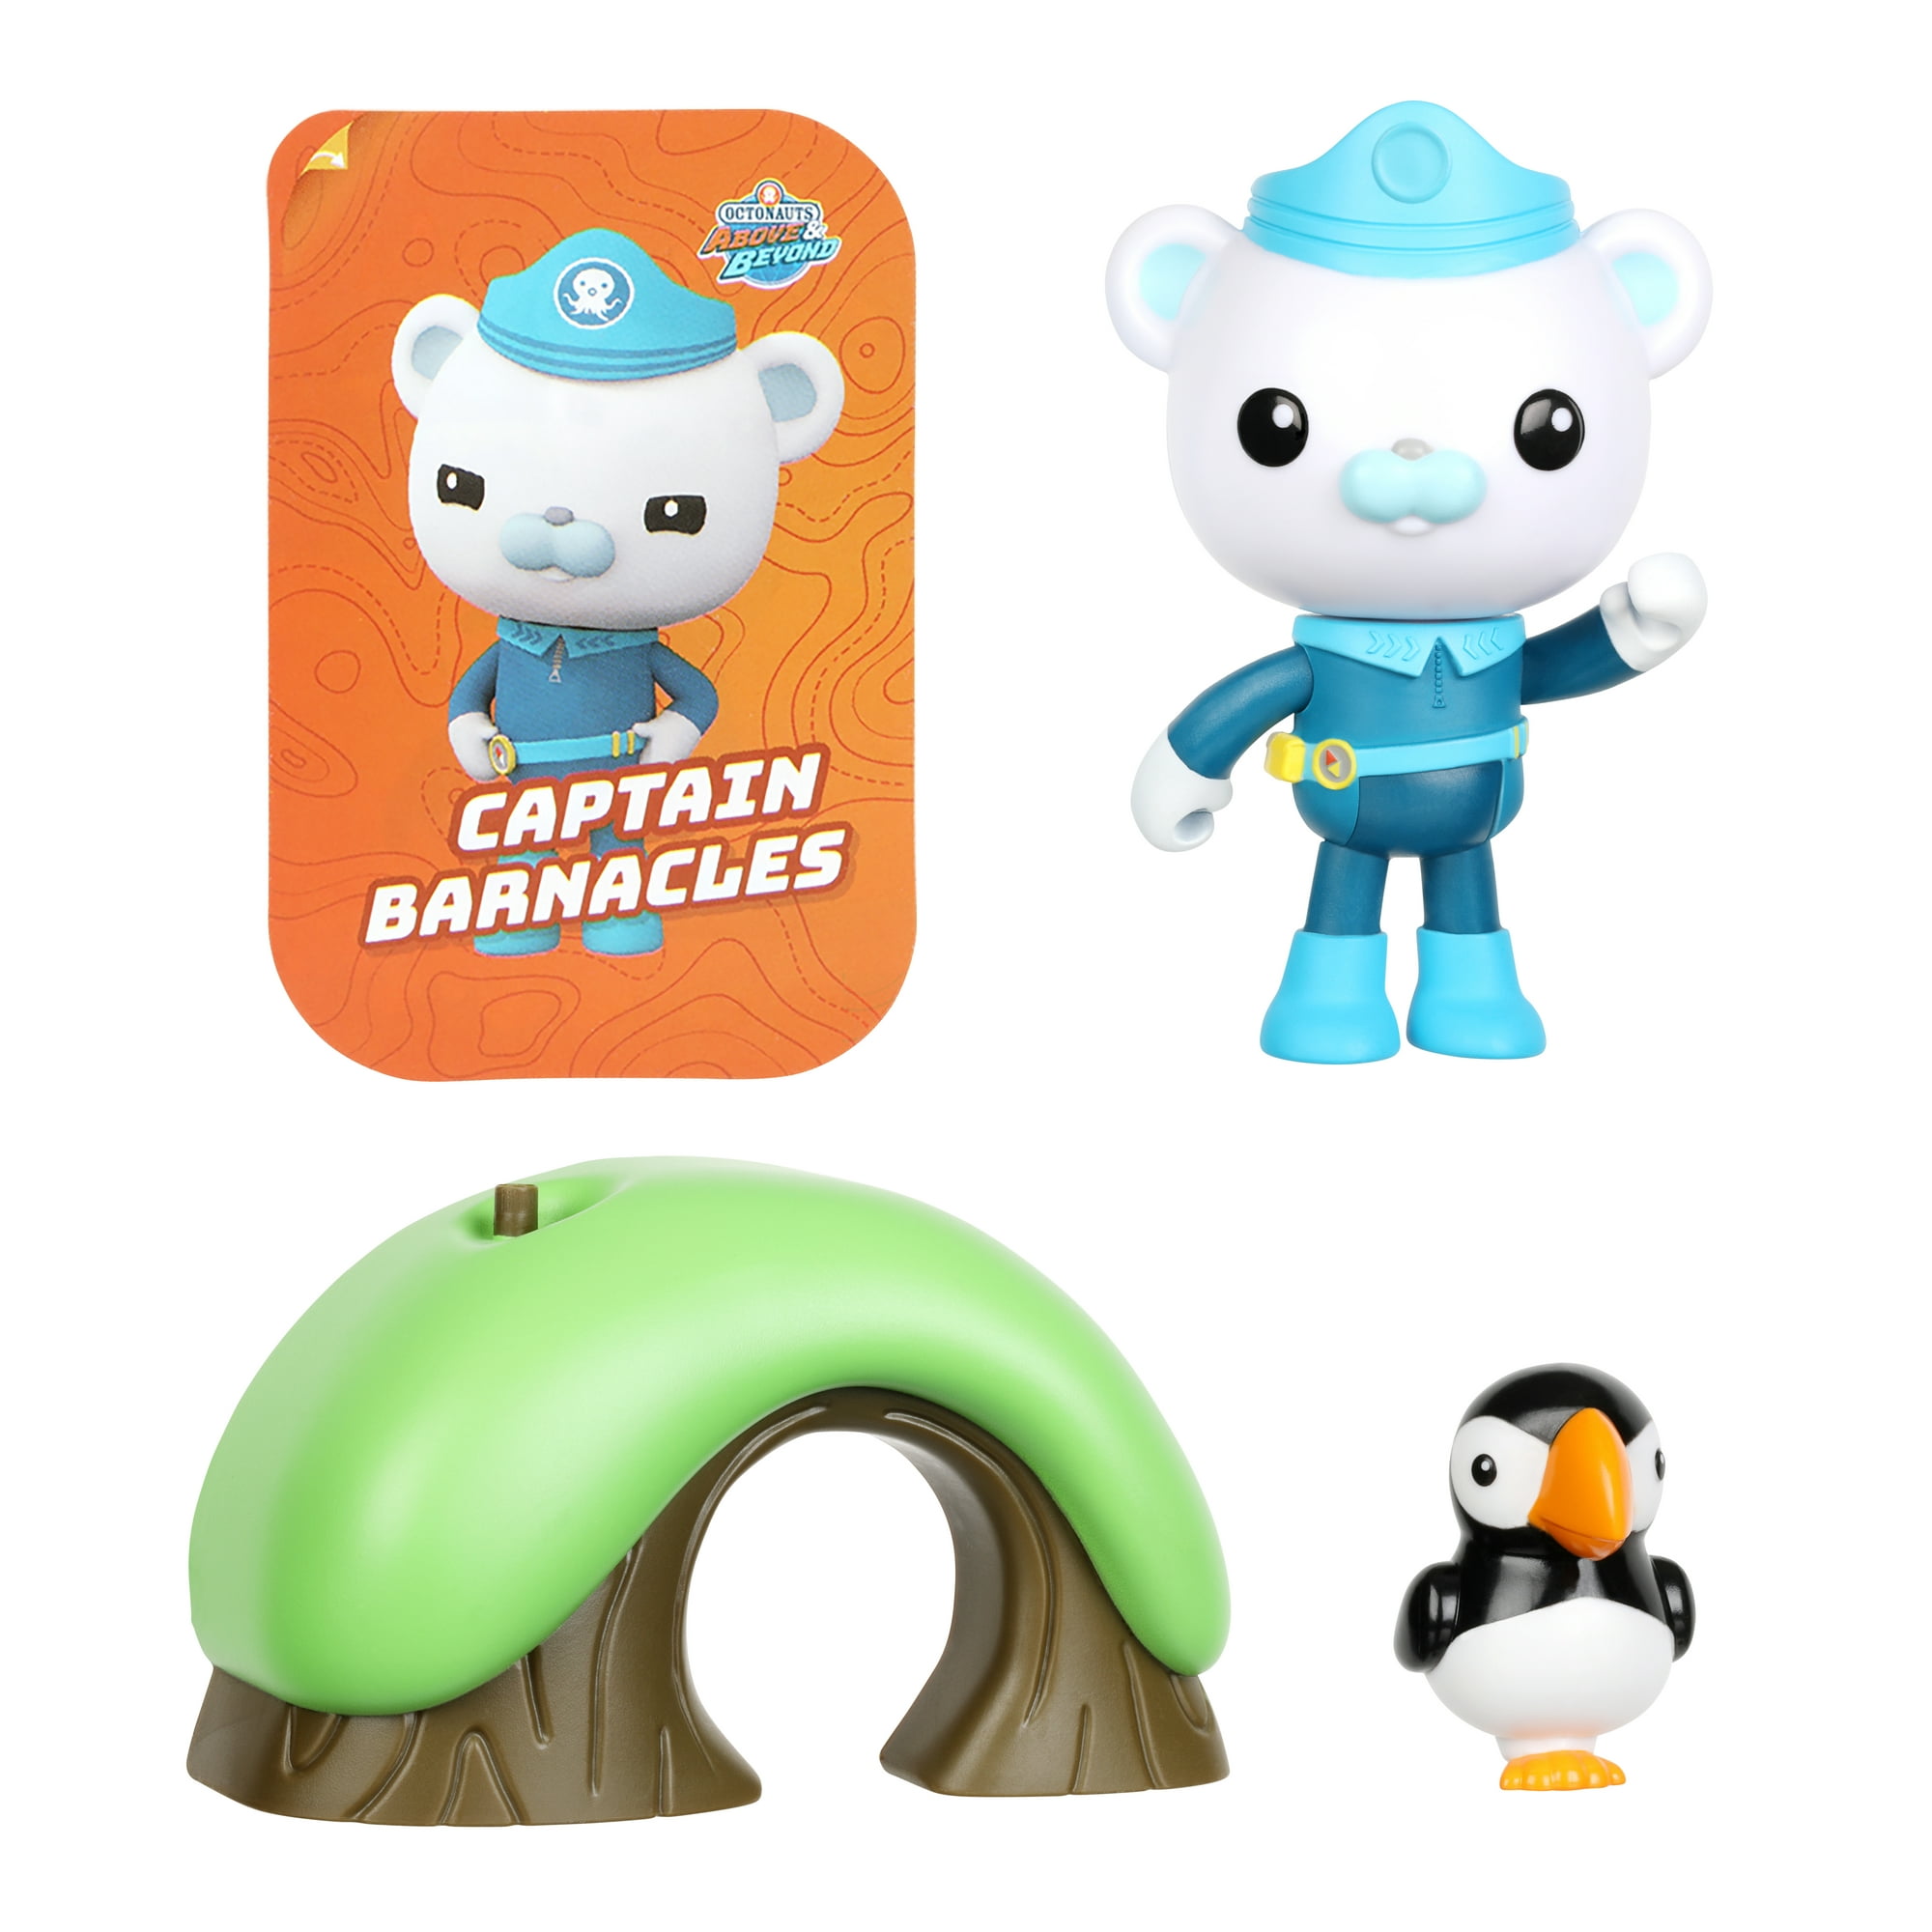 Octonauts Above & Beyond, Captain Barnacles 3 inch Deluxe Toy Figure Adventure Pack, Preschool, Ages 3+